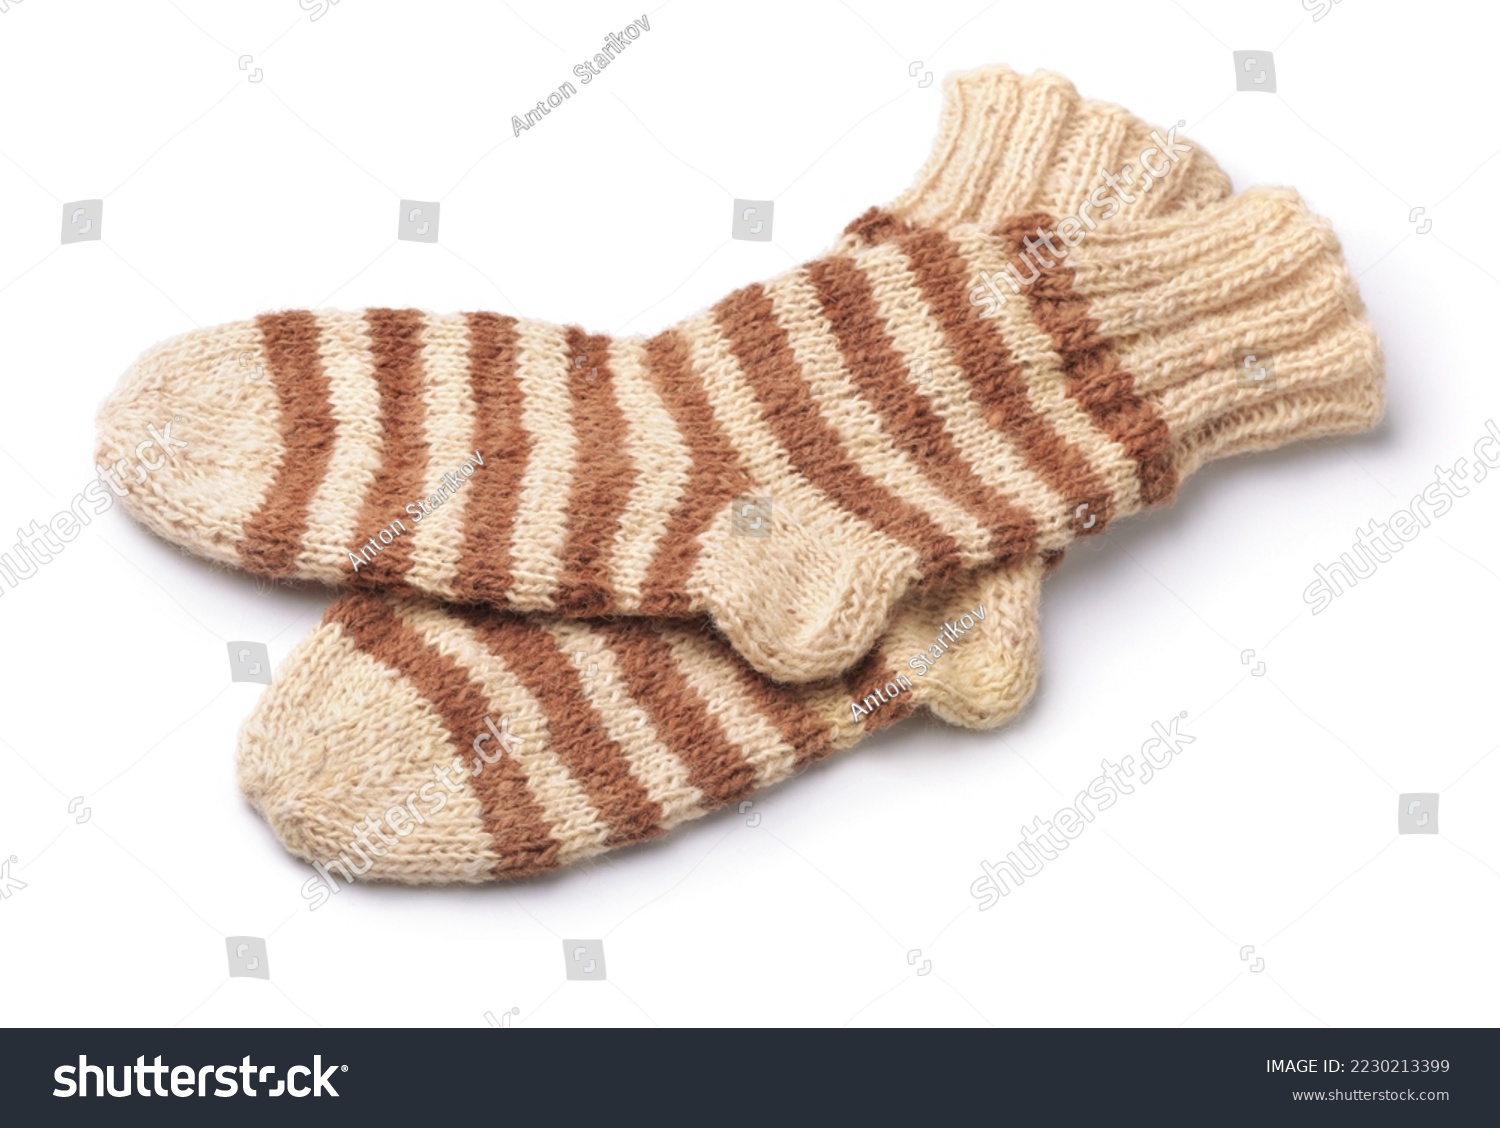 Pair of striped woolen knitted socks isolated on white #2230213399